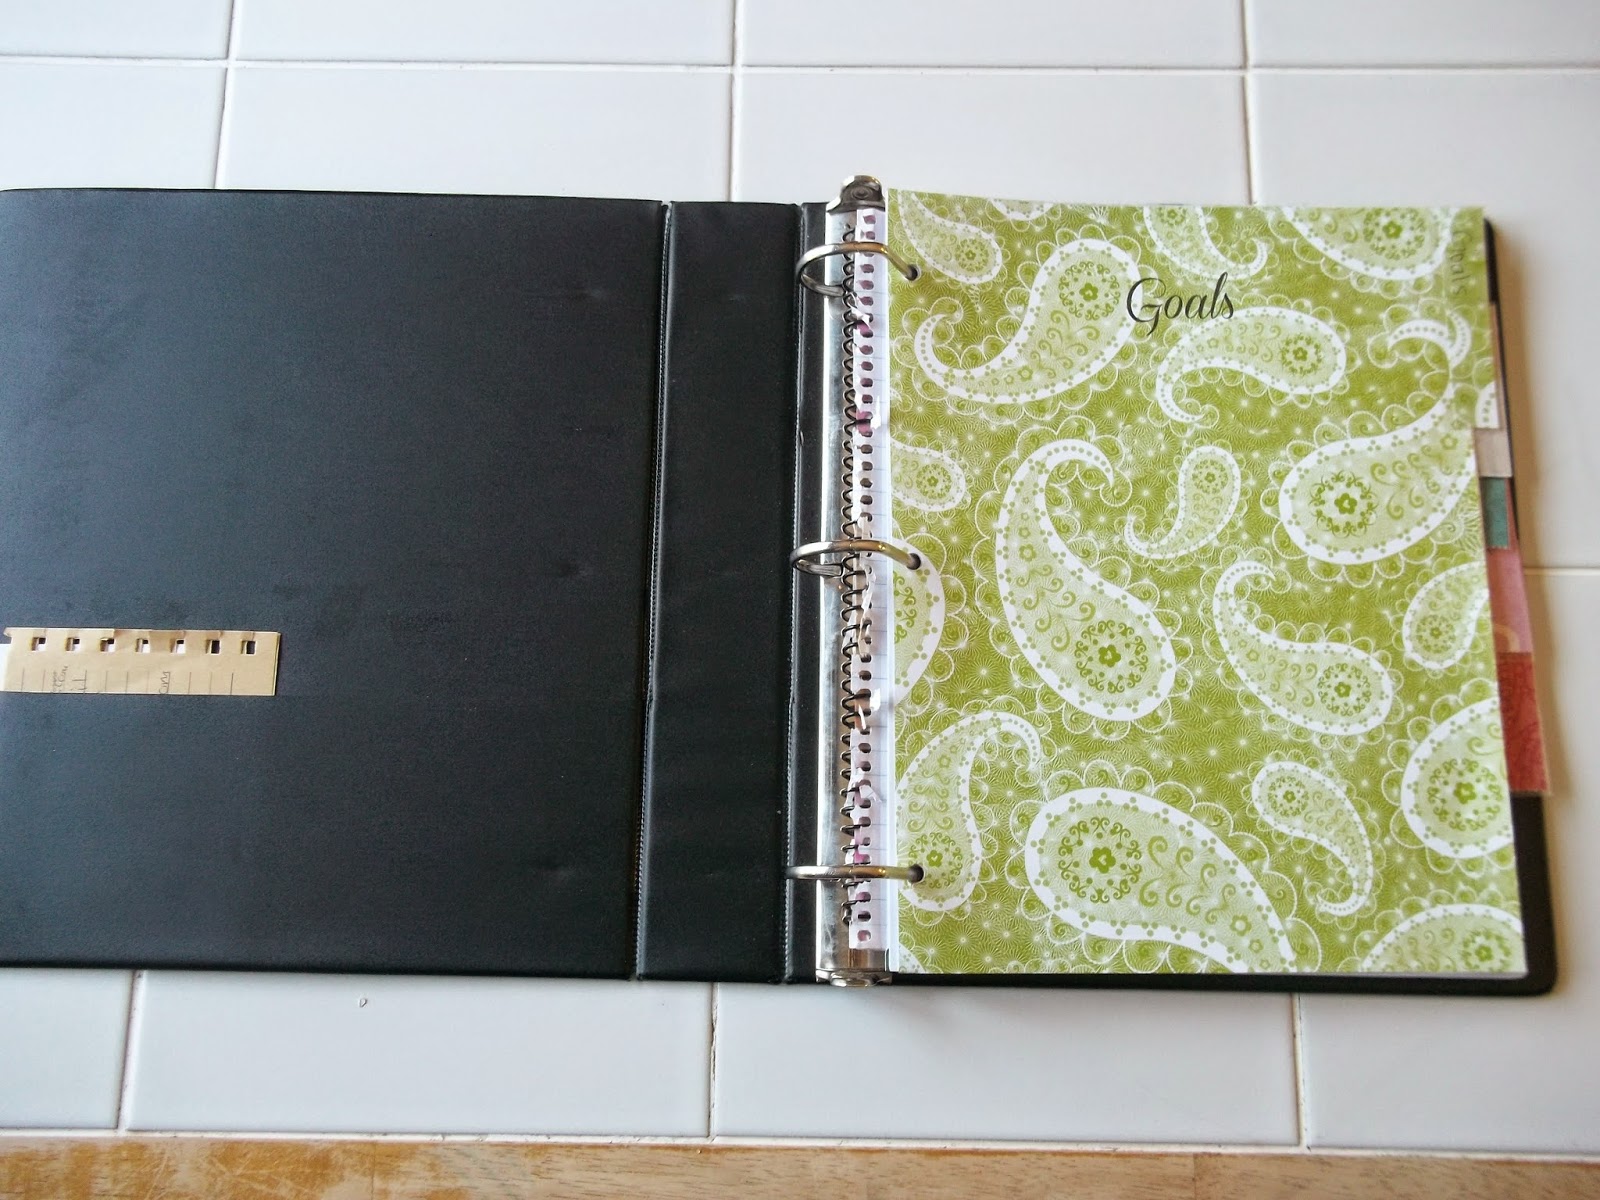 bows-clothes-diy-binder-dividers-and-cover